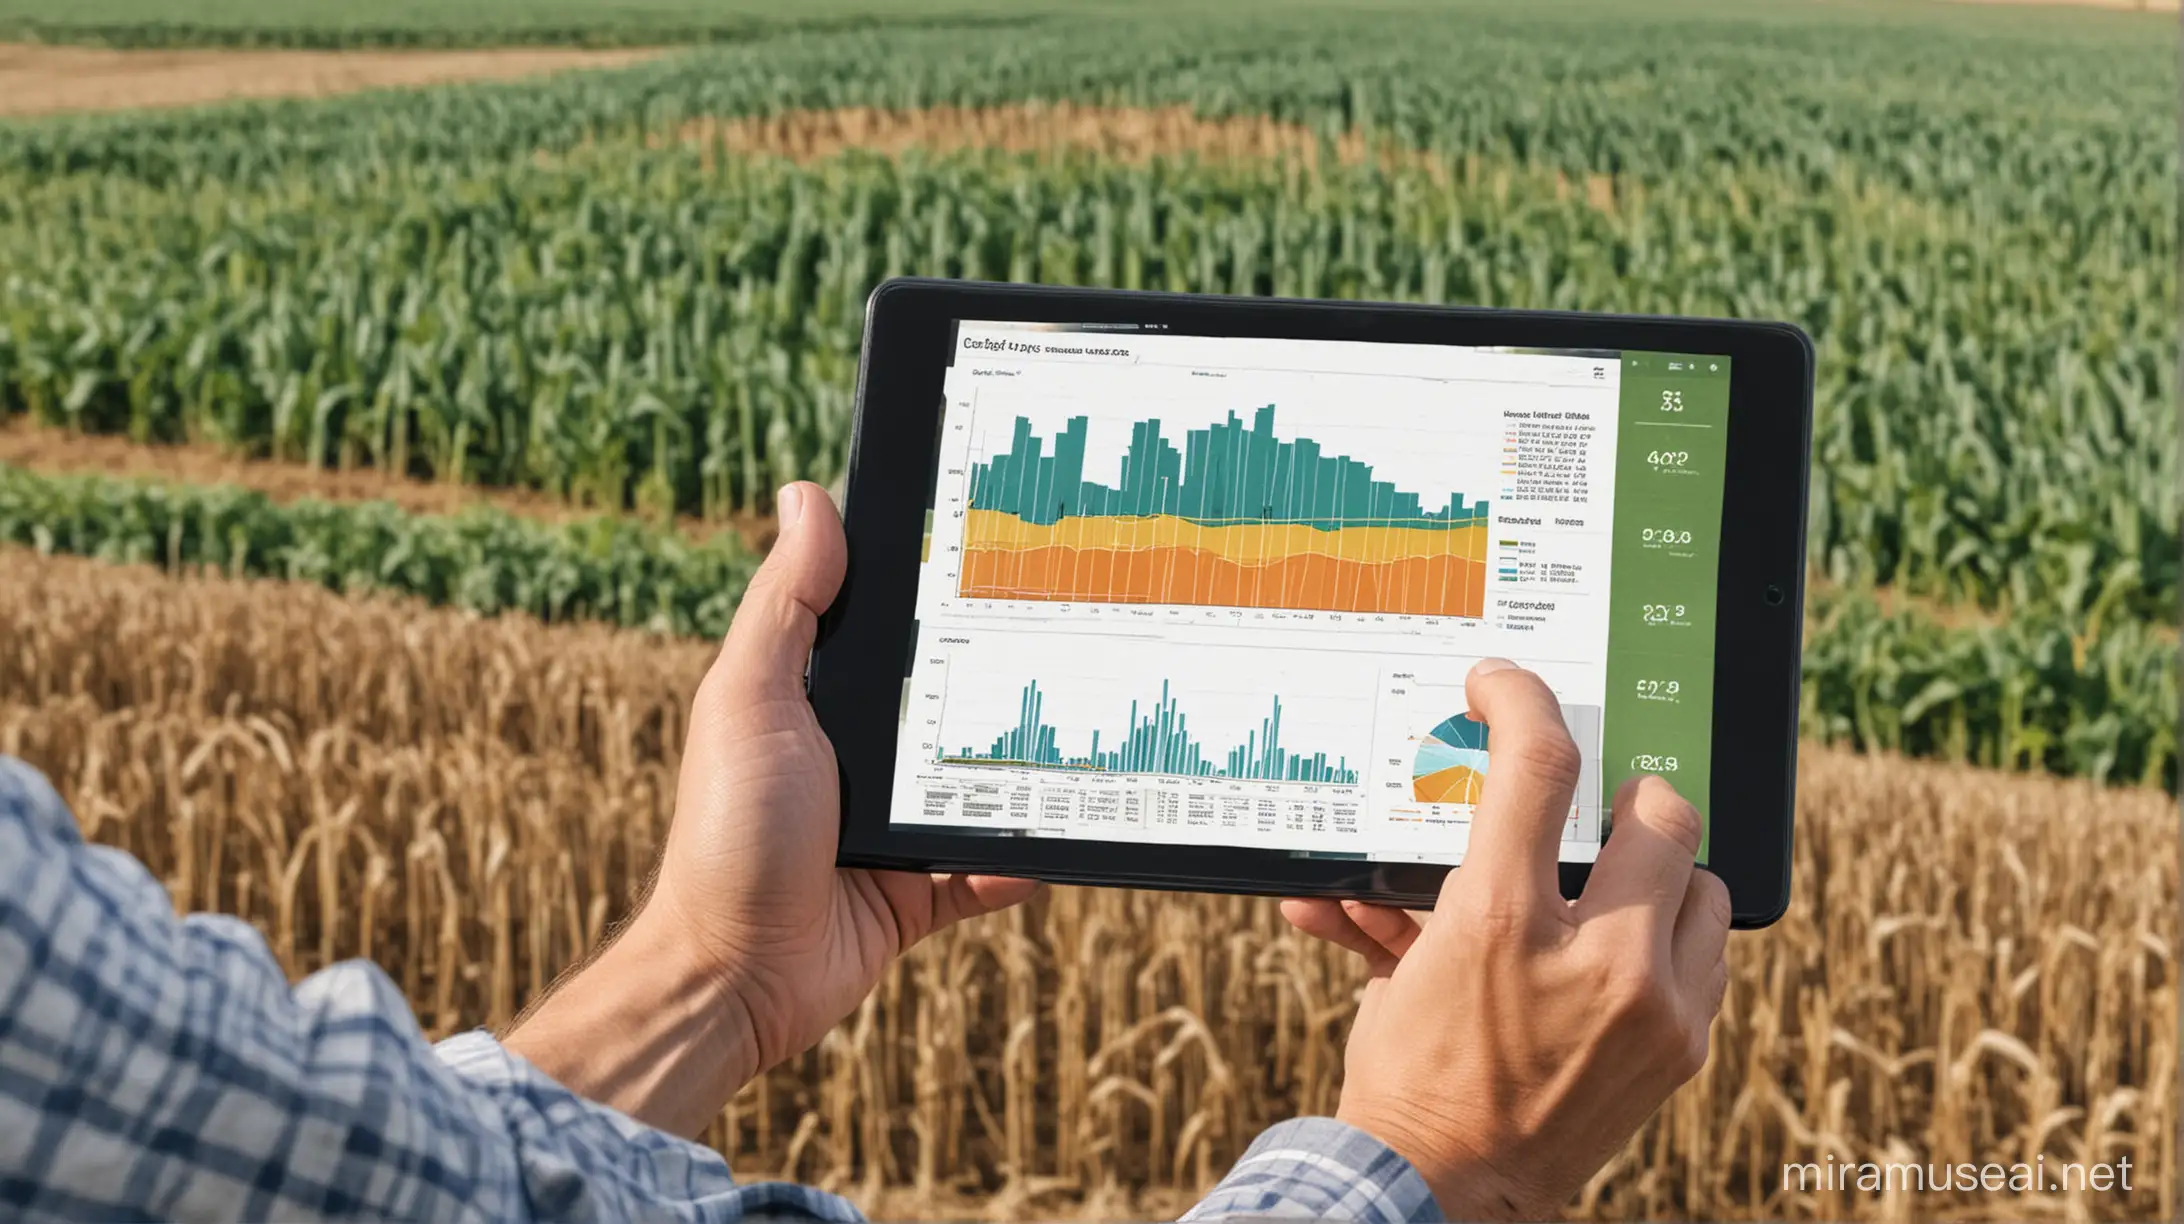 farm filed in the background. and a close up of man's hand holding a tablet with charts and graphs about agriculture predictions